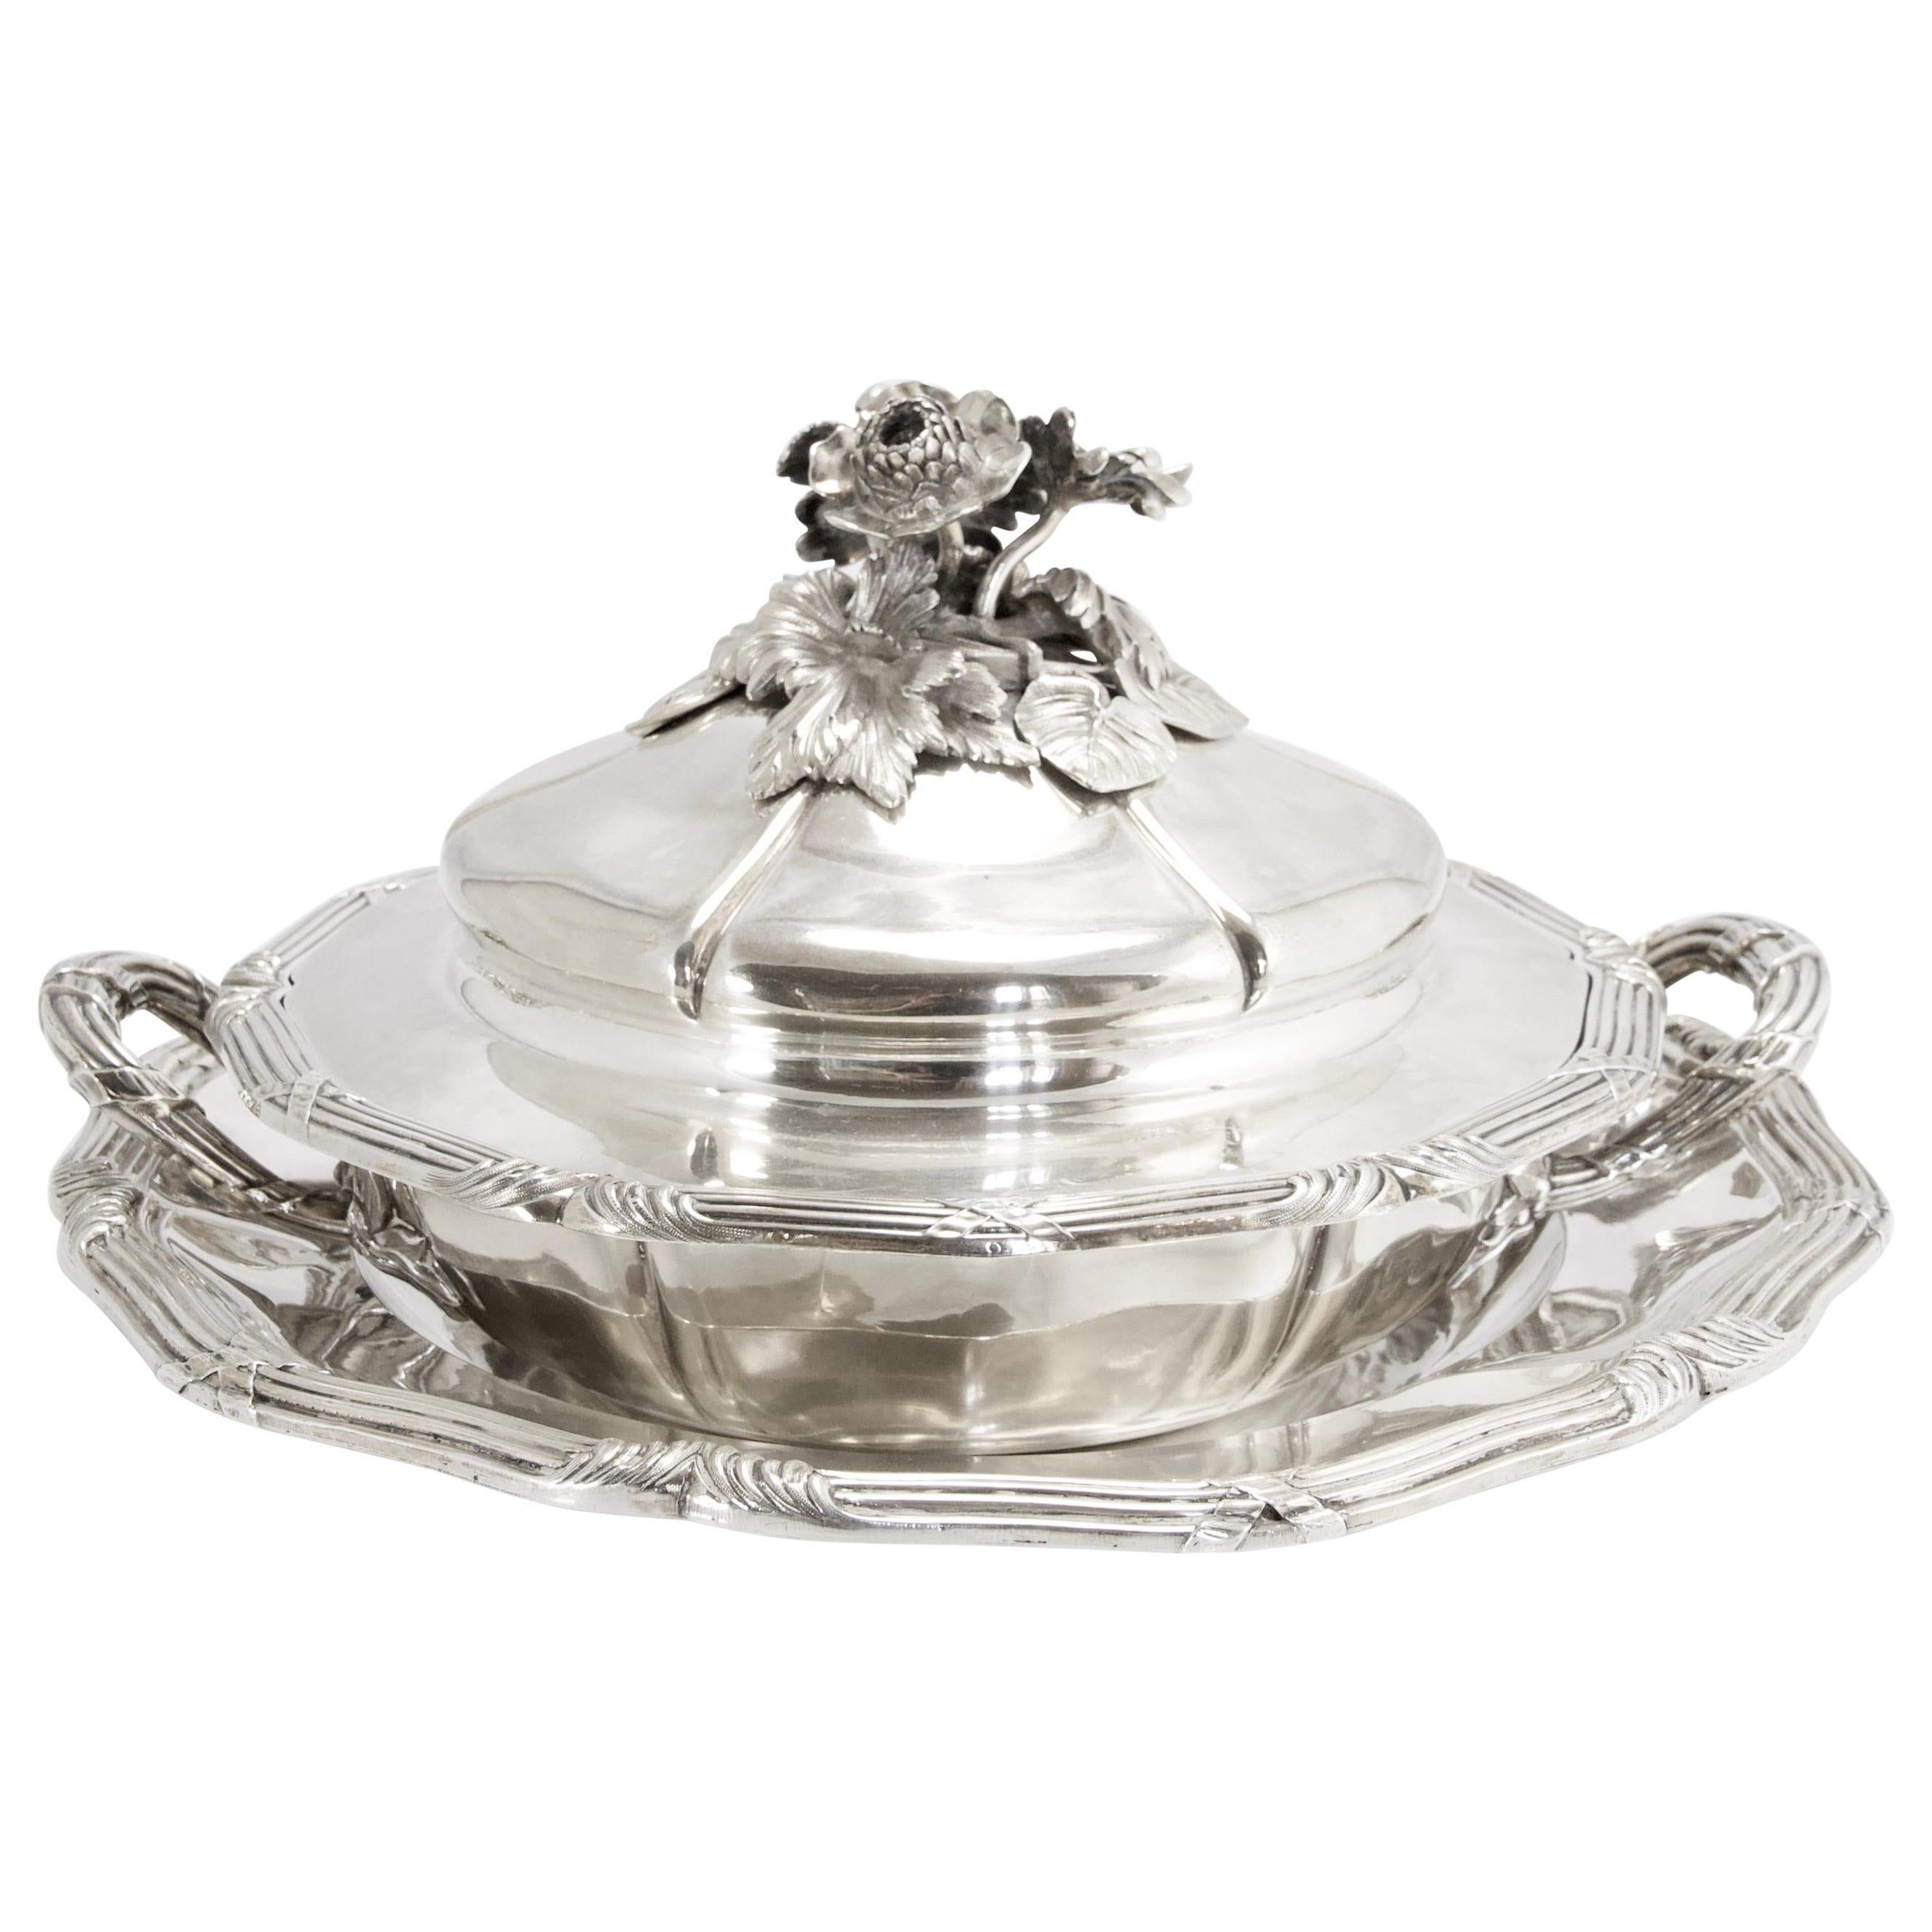 Odiot Sterling Silver Covered Vegetables Dishes For Sale